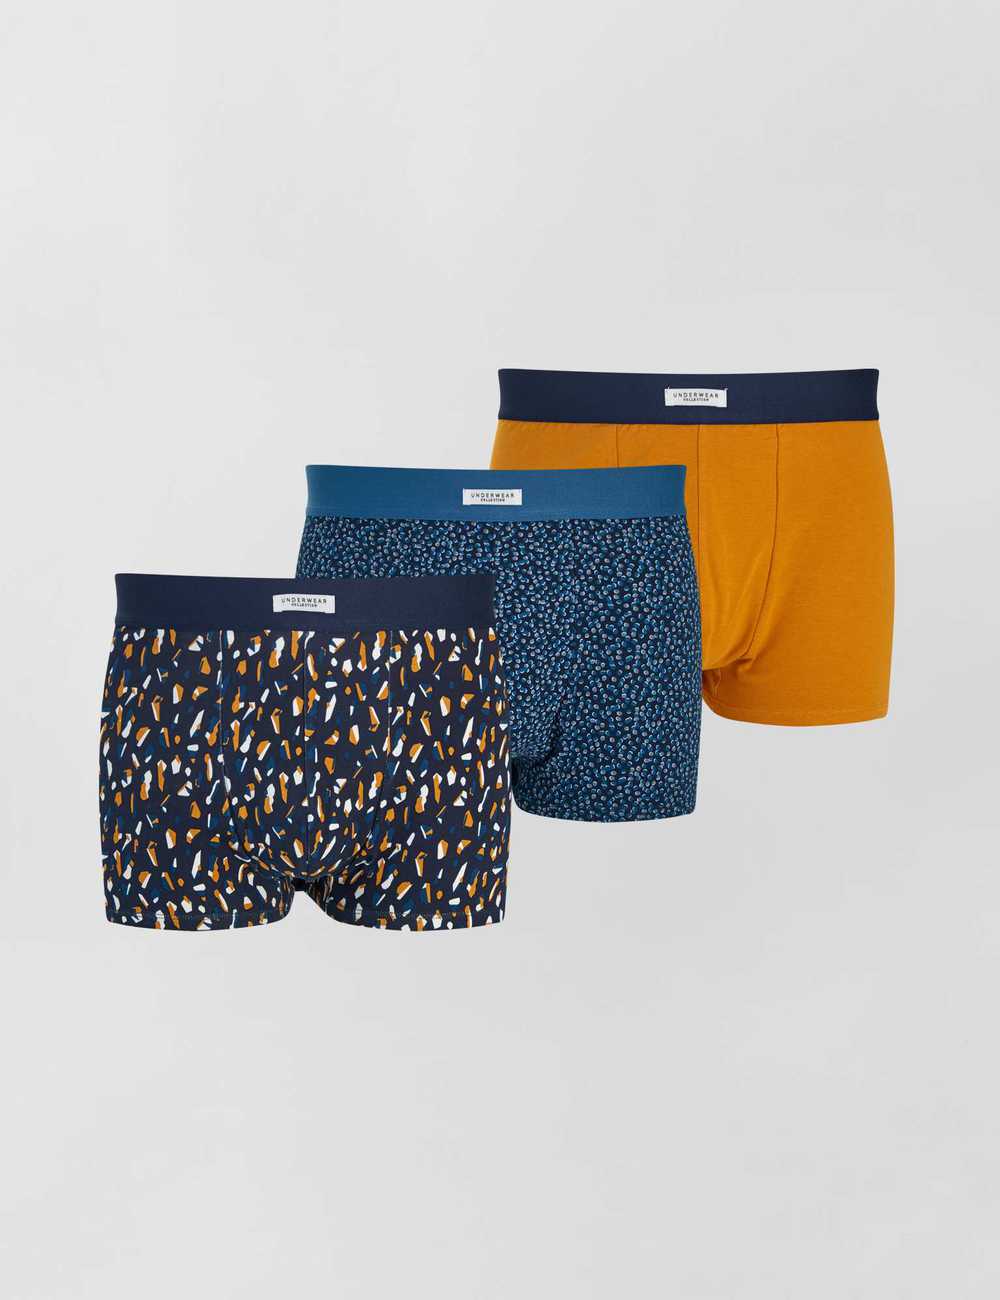 Buy Pack of 3 pairs of cotton boxer shorts Online in Dubai & the UAE